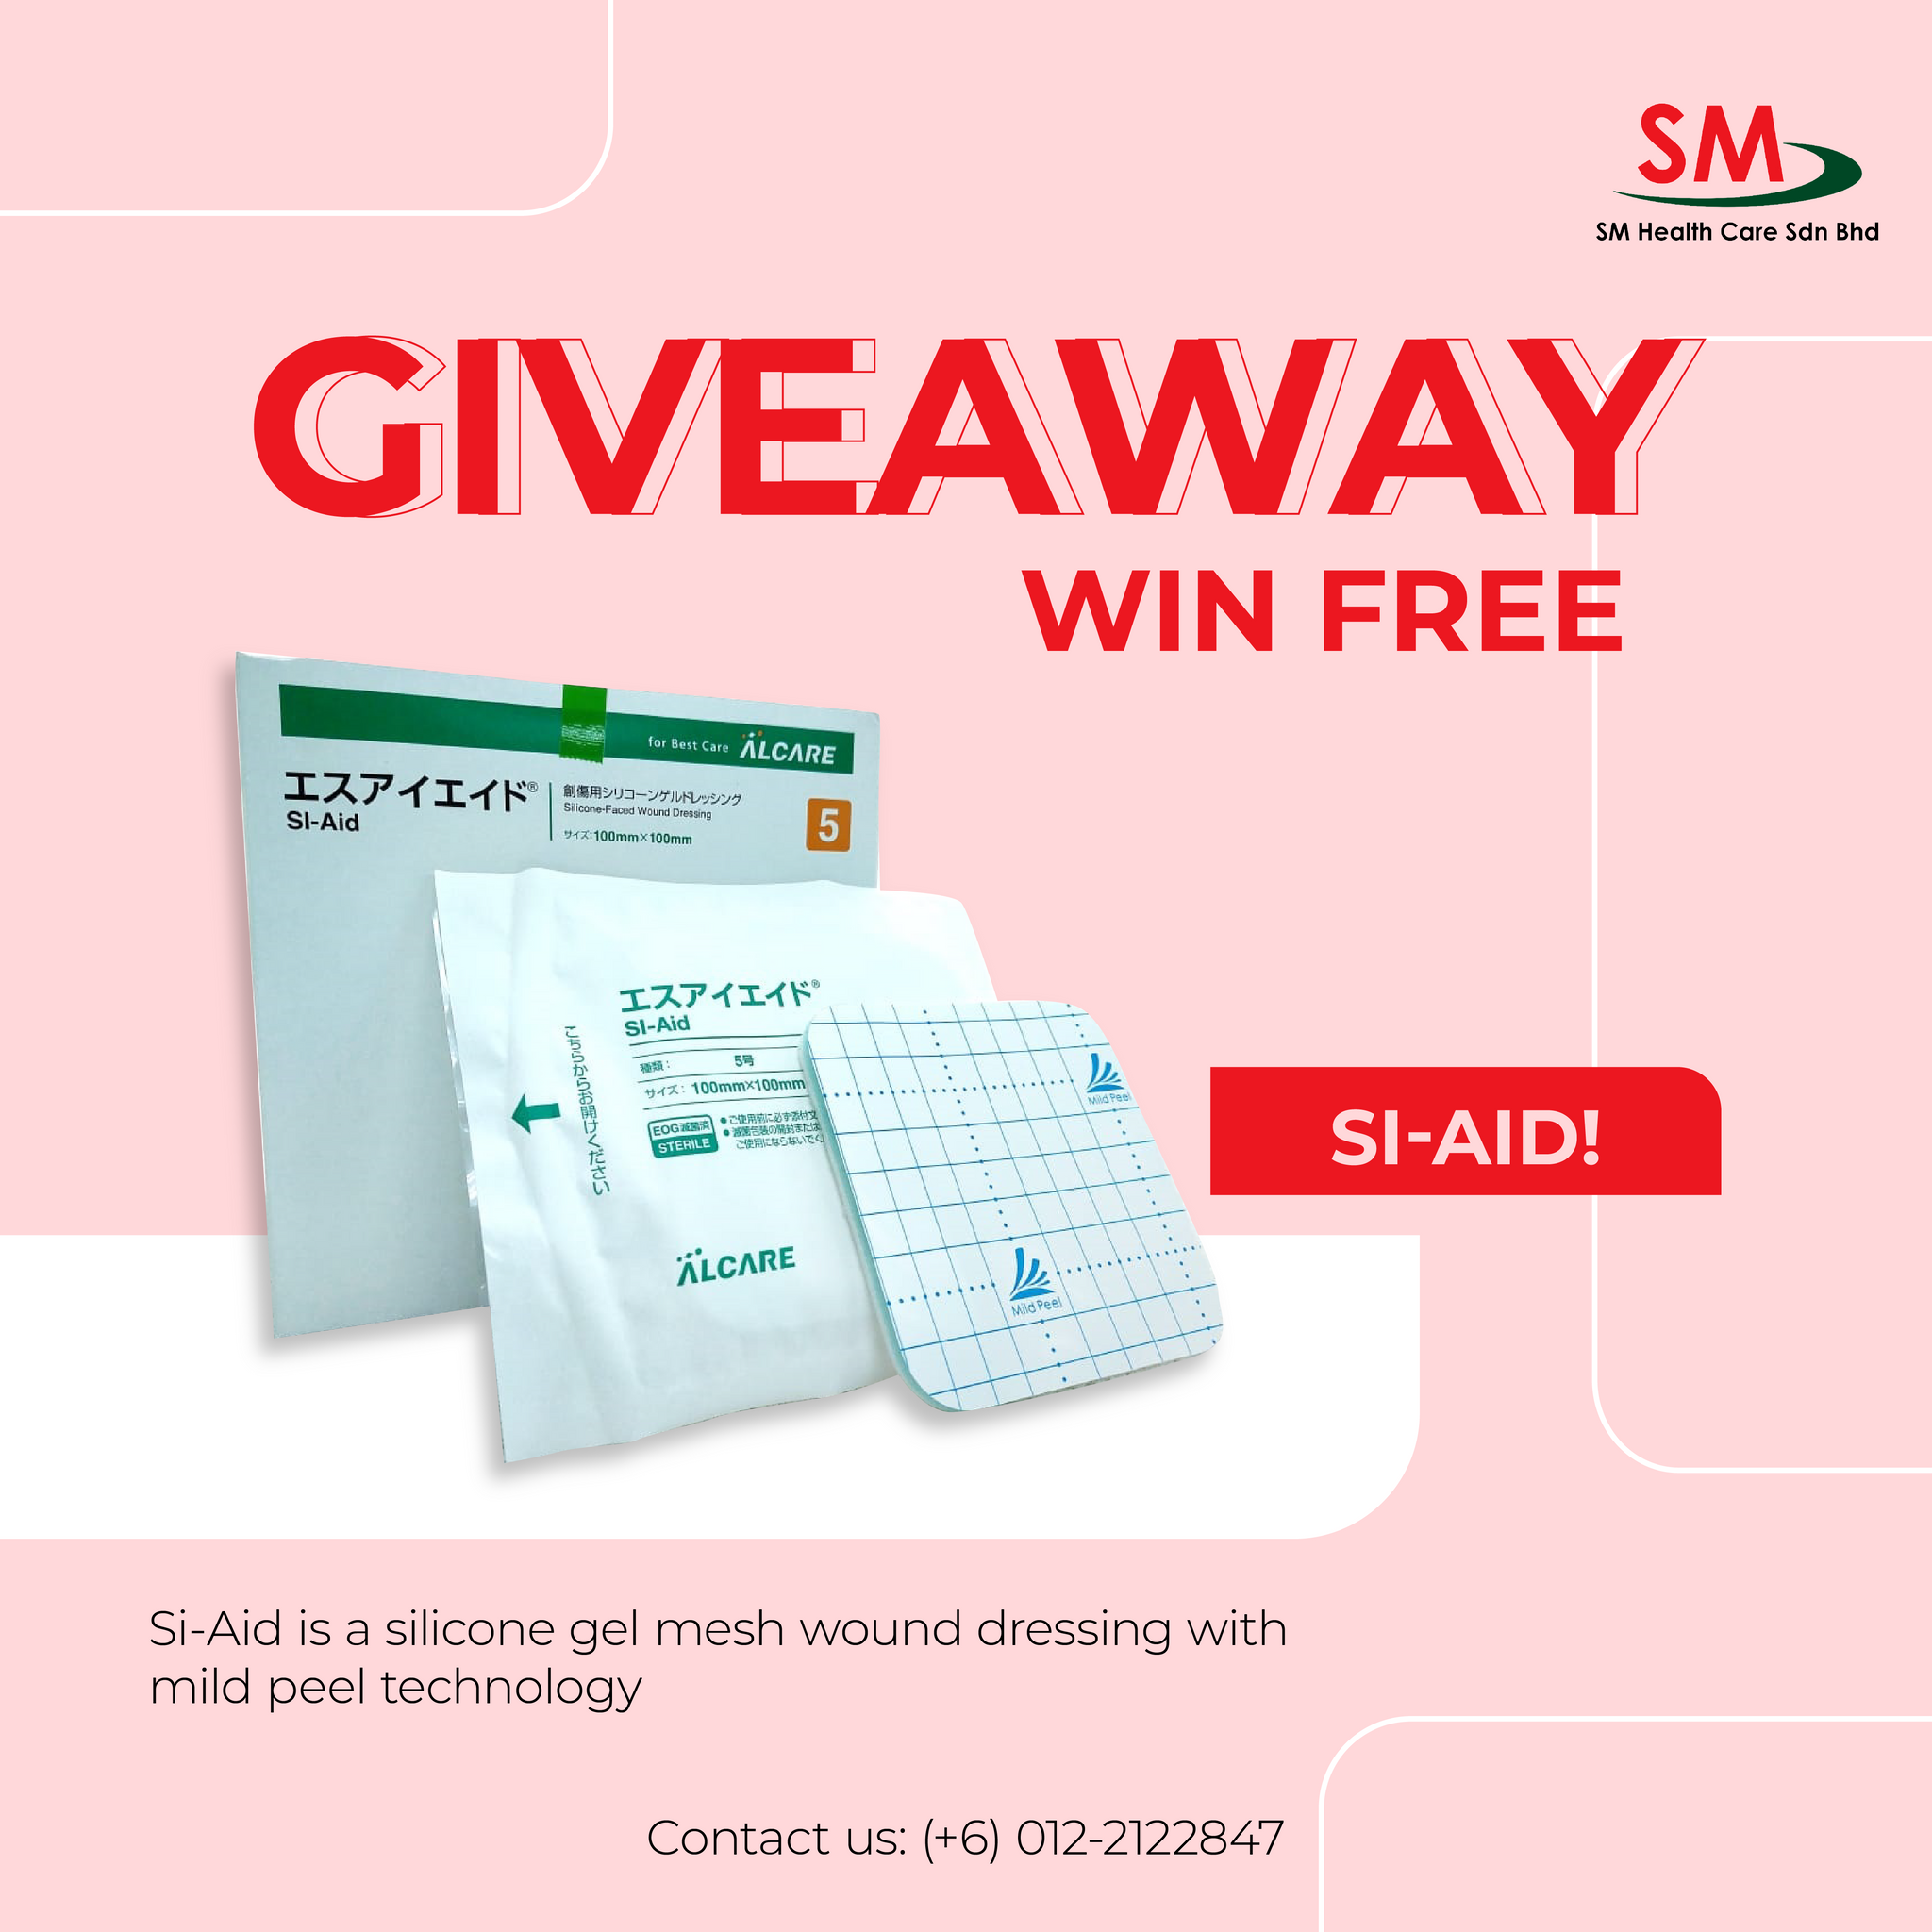 Si-Aid Giveaway at SM Health Care Sdn Bhd